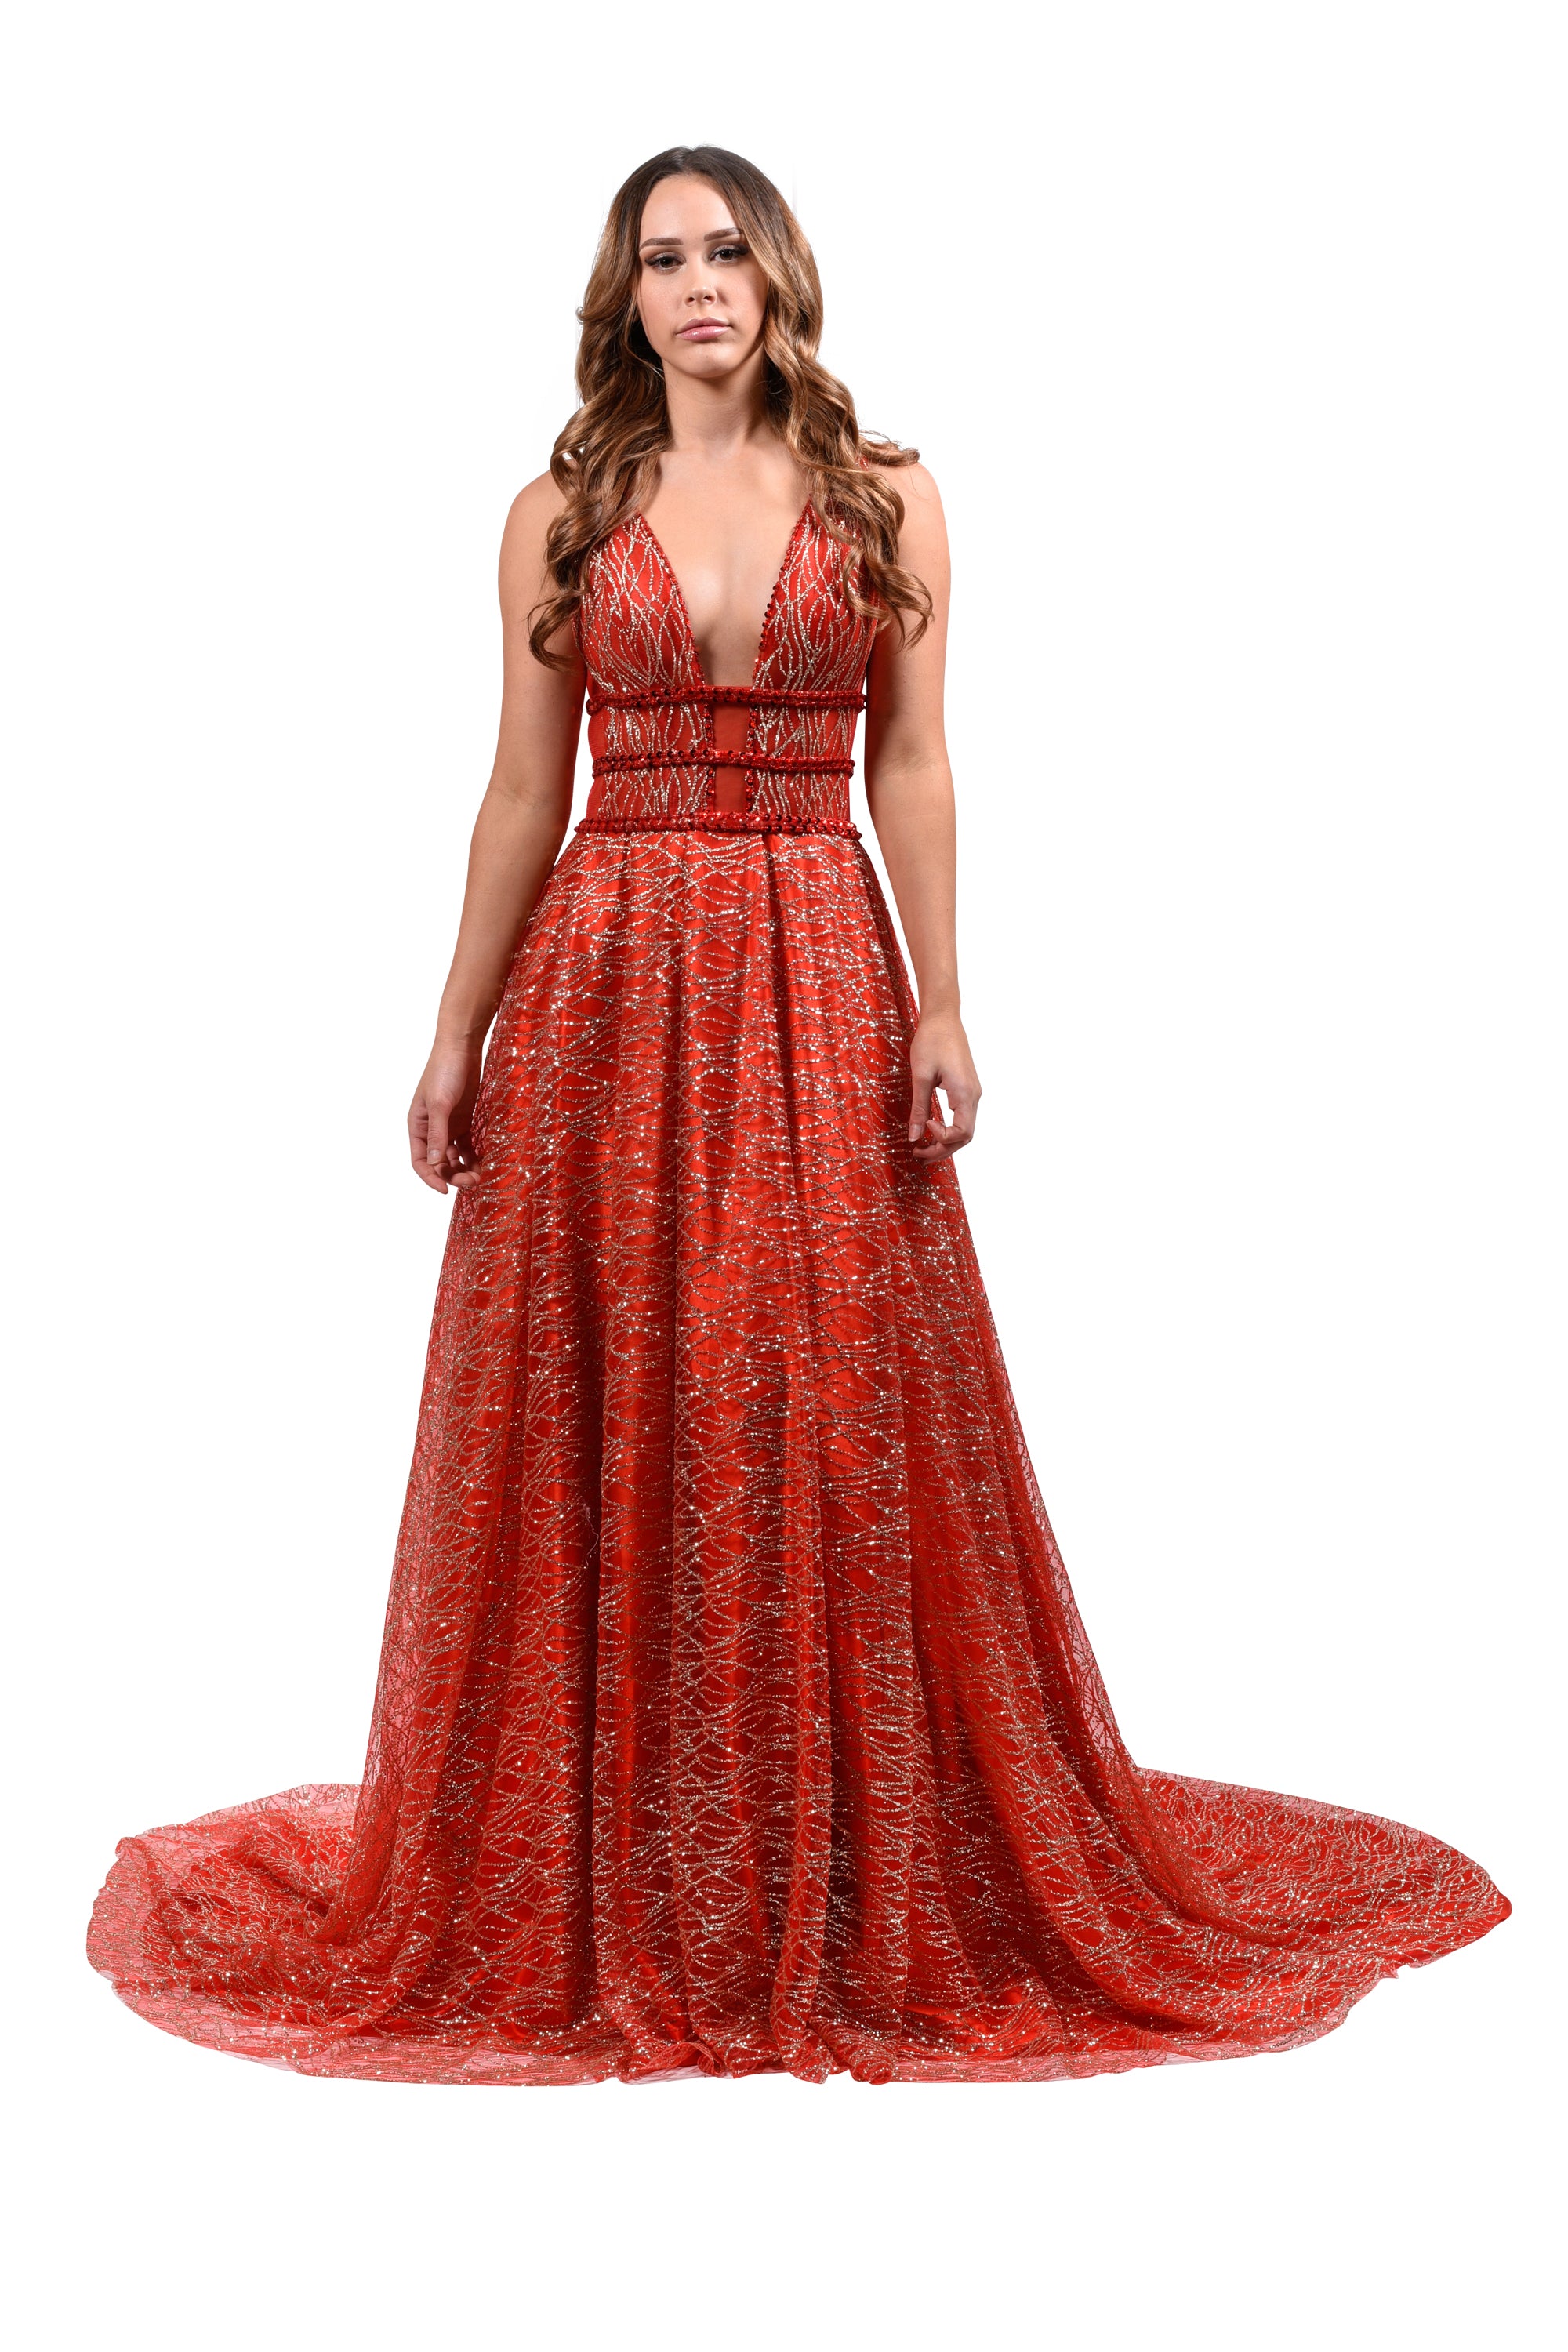 Honey Couture GLORIA Red Gold Glitter Infused Formal Ball Gown Private Label$ AfterPay Humm ZipPay LayBuy Sezzle